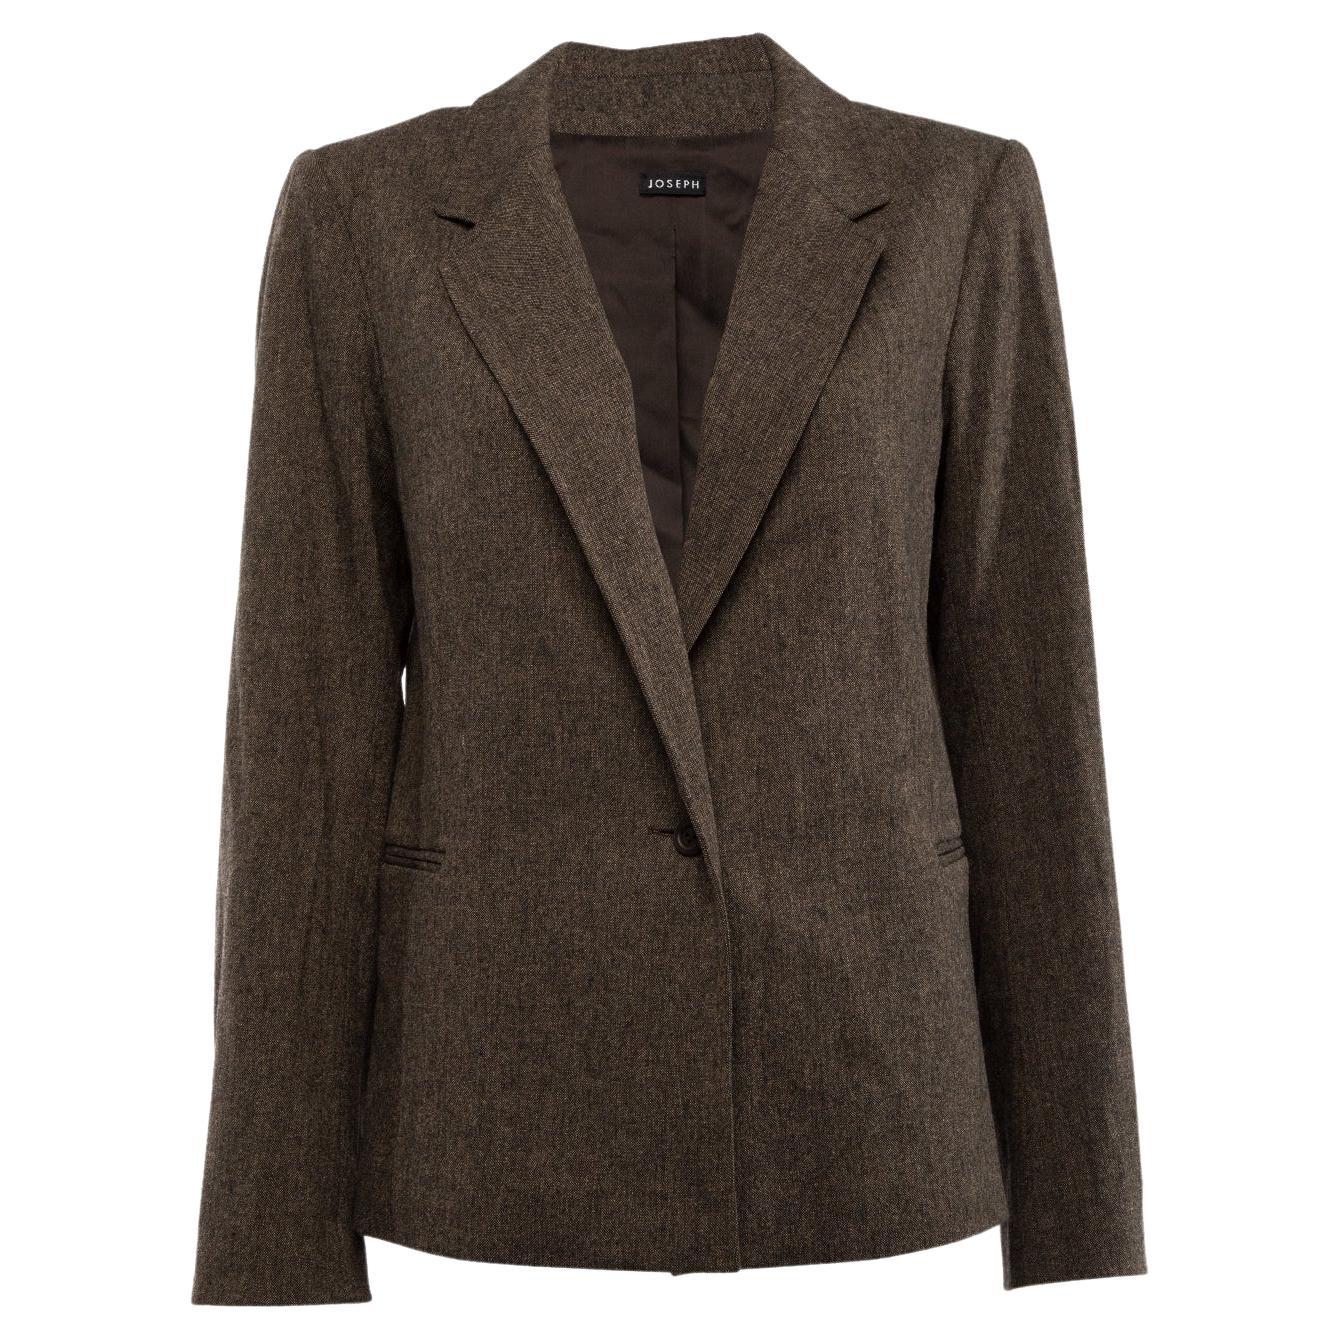 Joseph Vintage Womens Equestrian Style Wool Blazer Jacket For Sale at ...